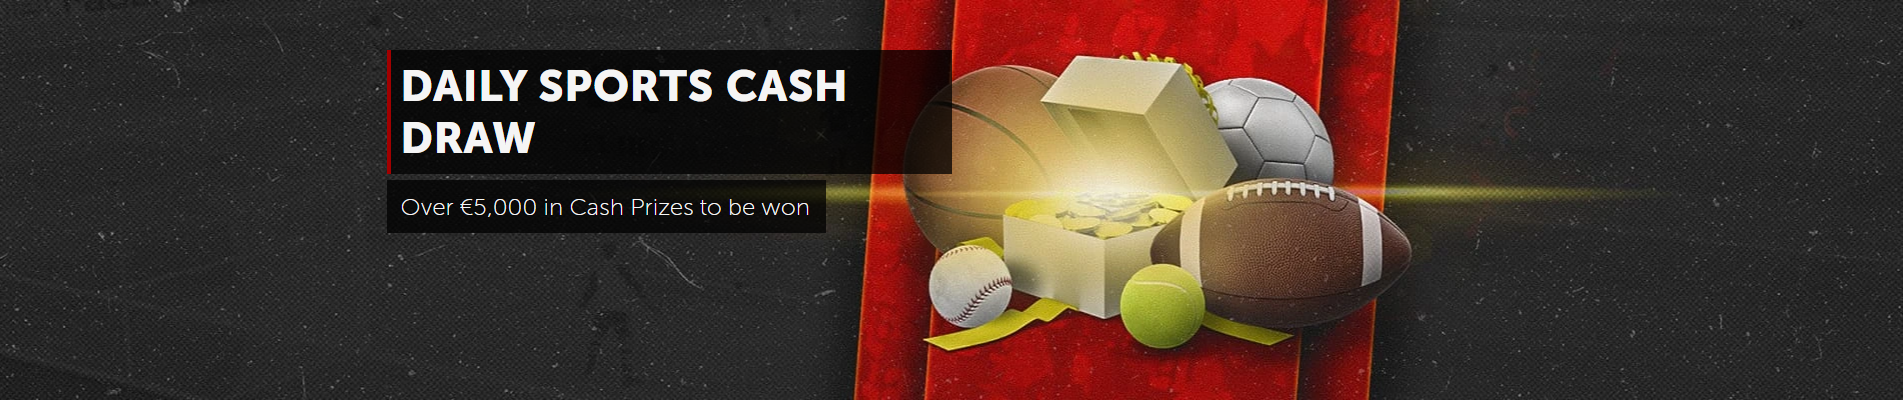 bookmaker betsafe daily sports cash draw offer